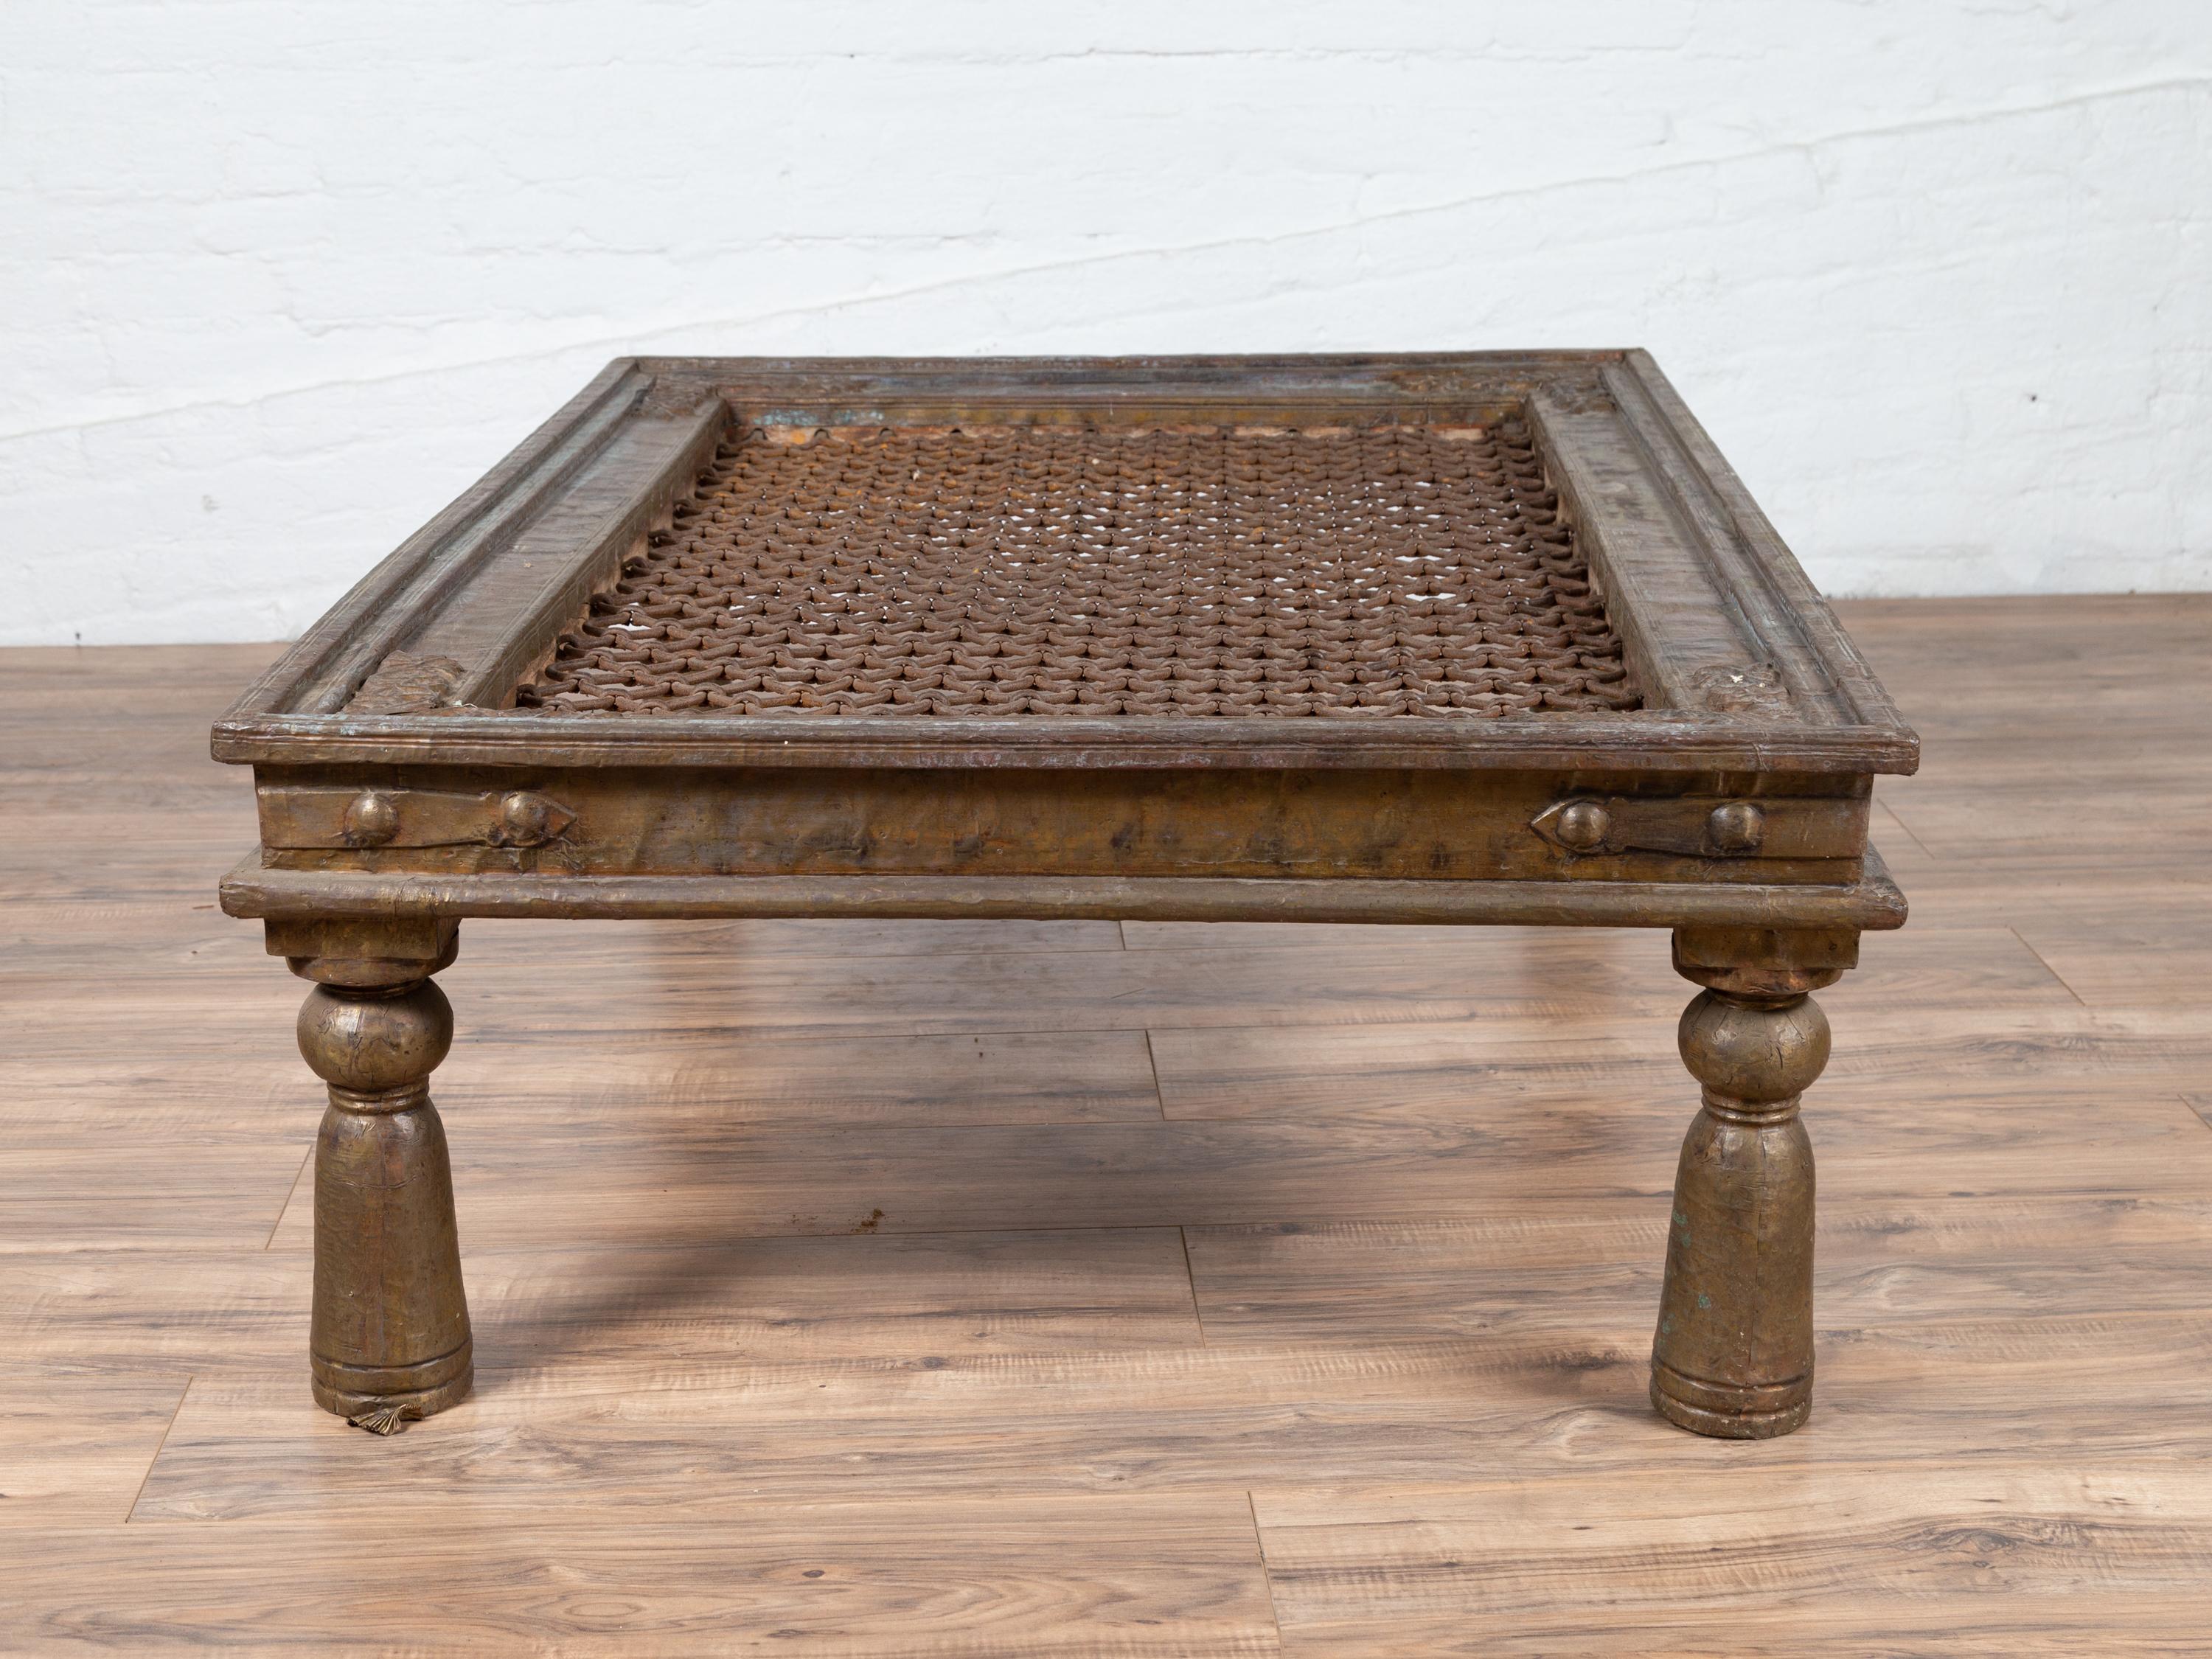 Antique Indian Window Grate Made into a Coffee Table with Metal Sheathing 5